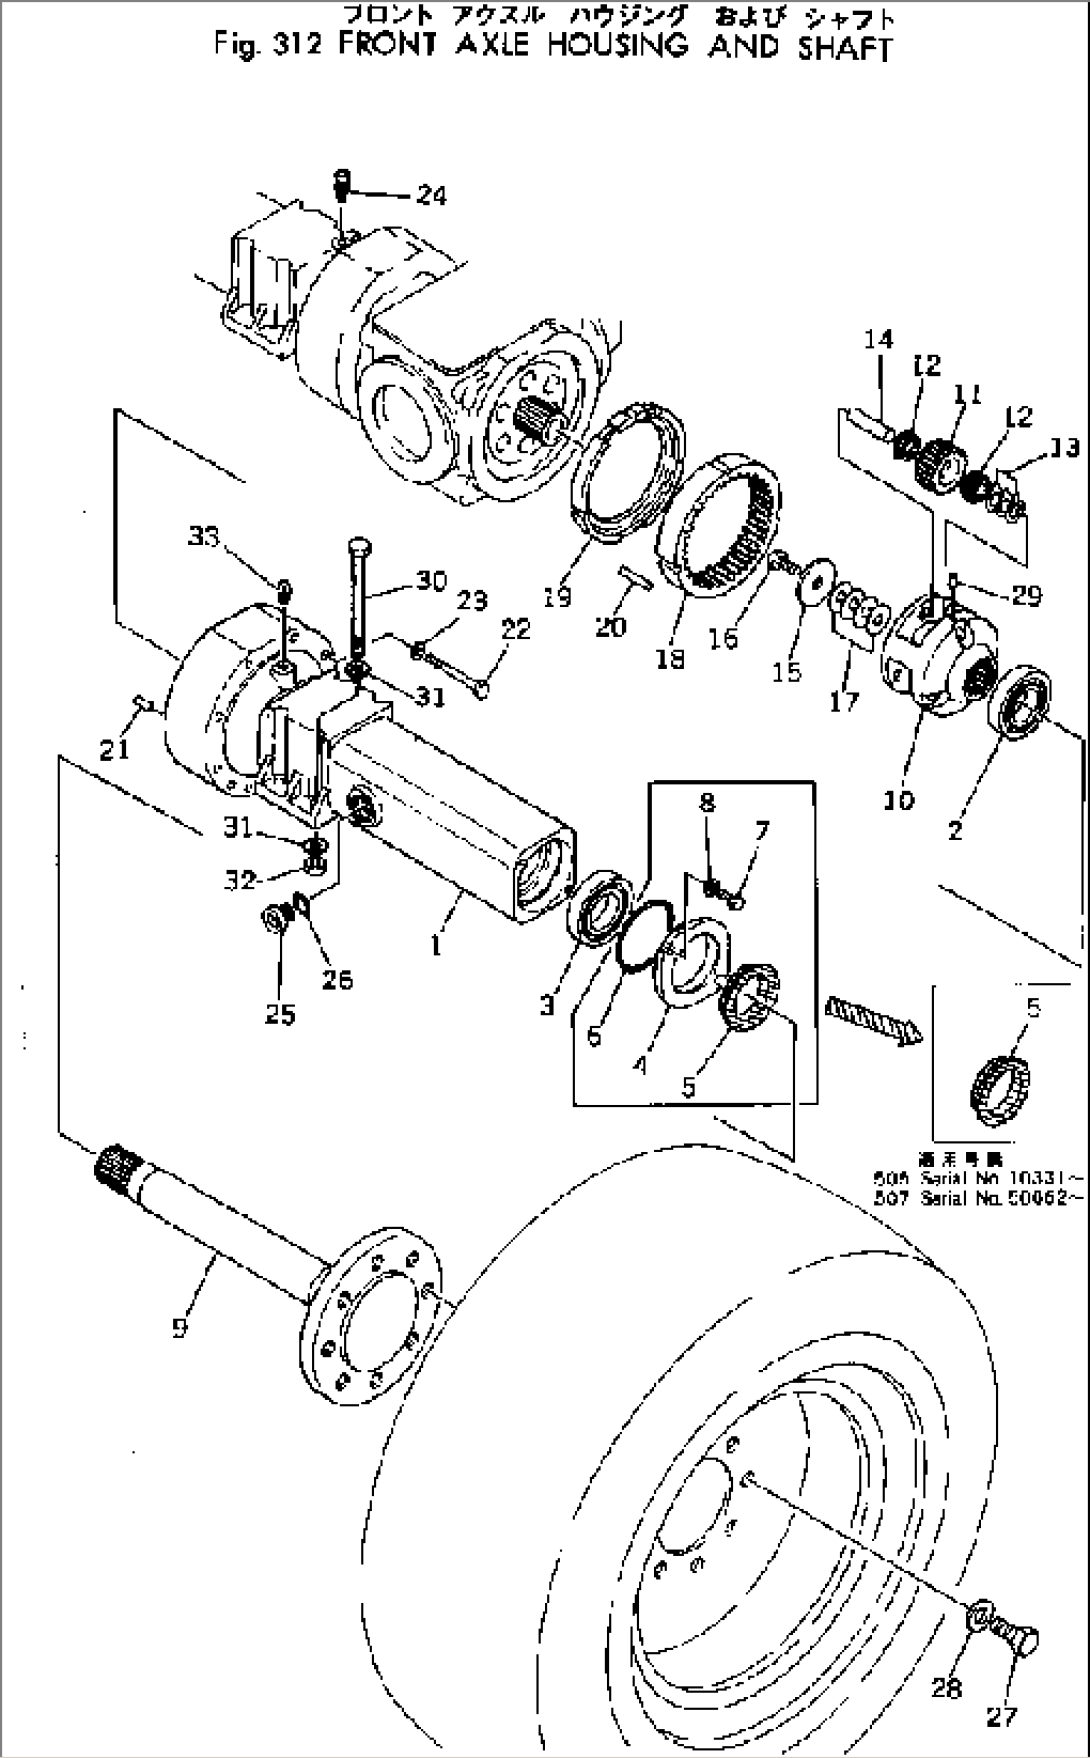 FRONT AXLE HOUSING AND SHAFT